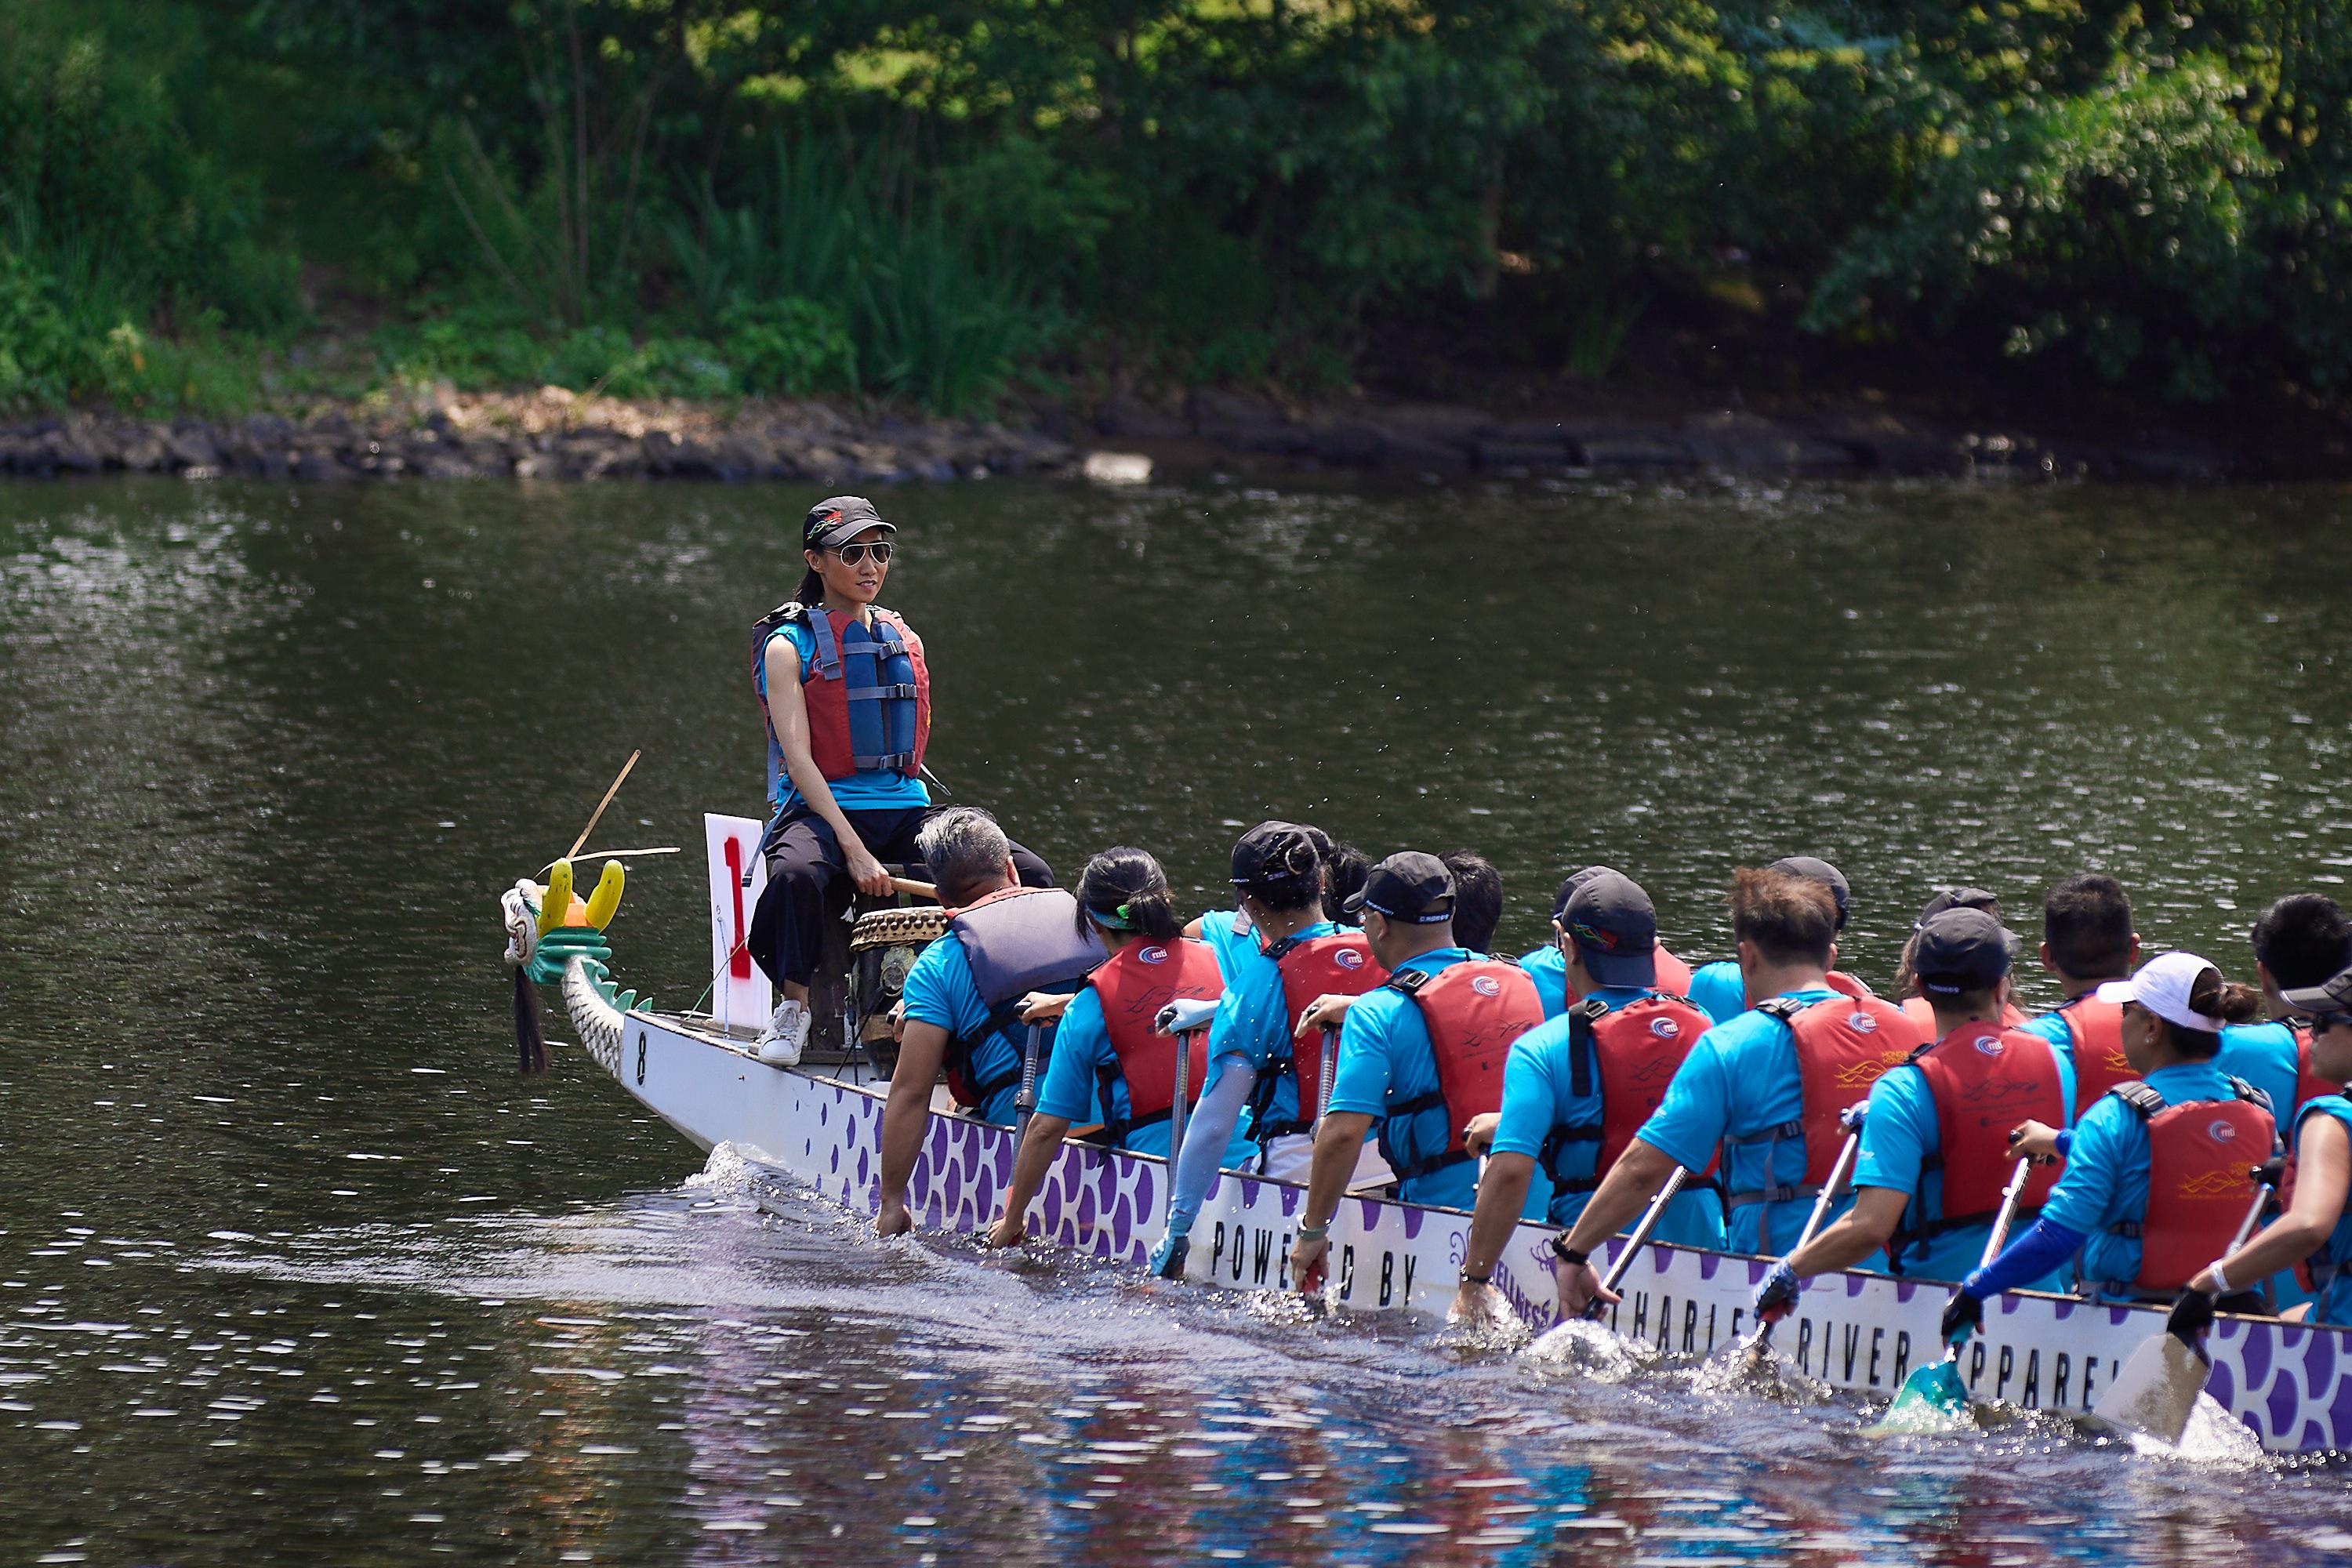 The Director of the Hong Kong Economic and Trade Office in New York (HKETONY), Ms Candy Nip, takes part in the races at the 44th Boston Hong Kong Dragon Boat Festival today (June 11, Boston time) as the drummer for the HKETONY Dragon Riders team.